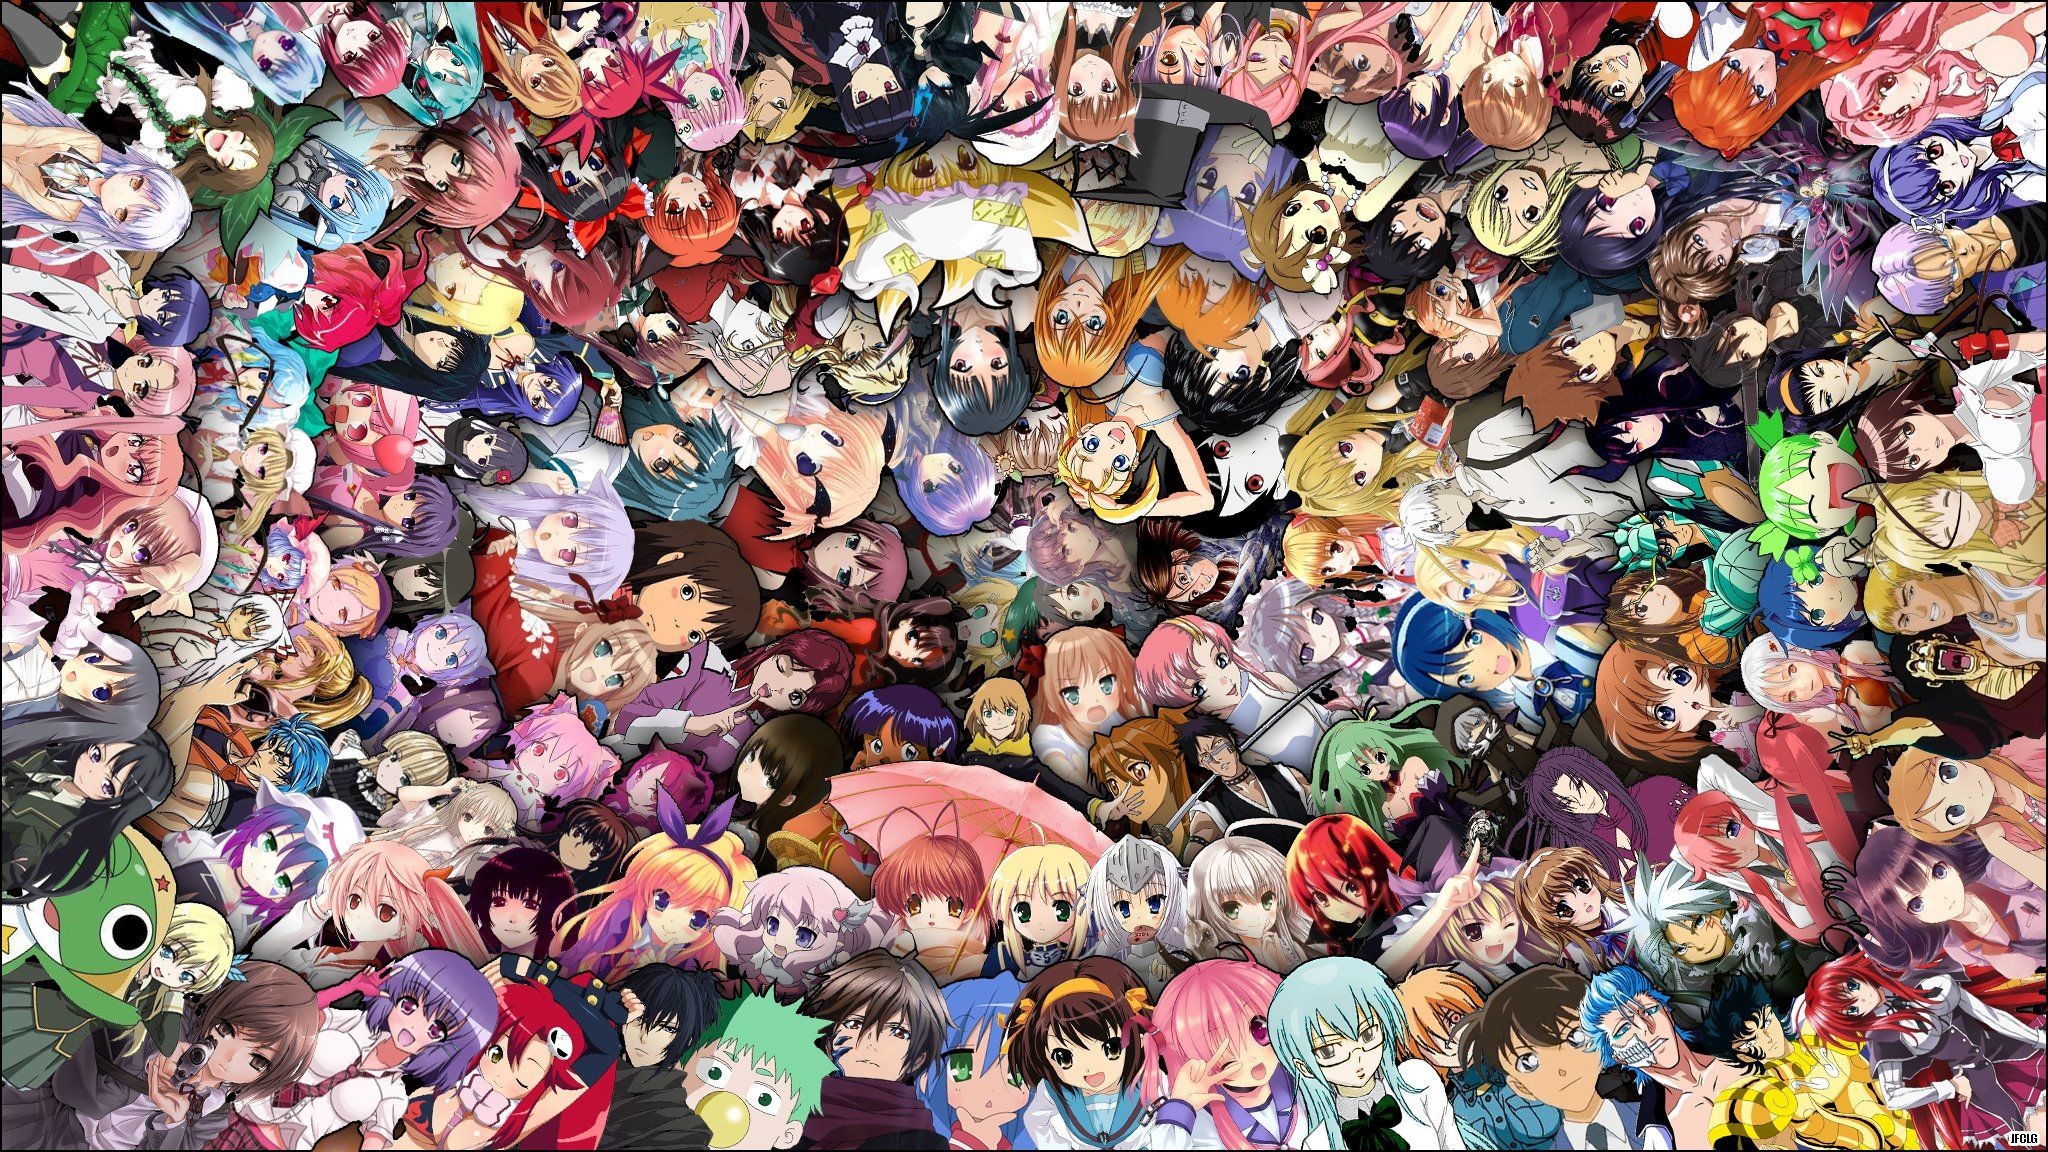 2048x1152, Anime Wallpaper Background Luxury - All Anime Characters  Background - 2048x1152 Wallpaper 